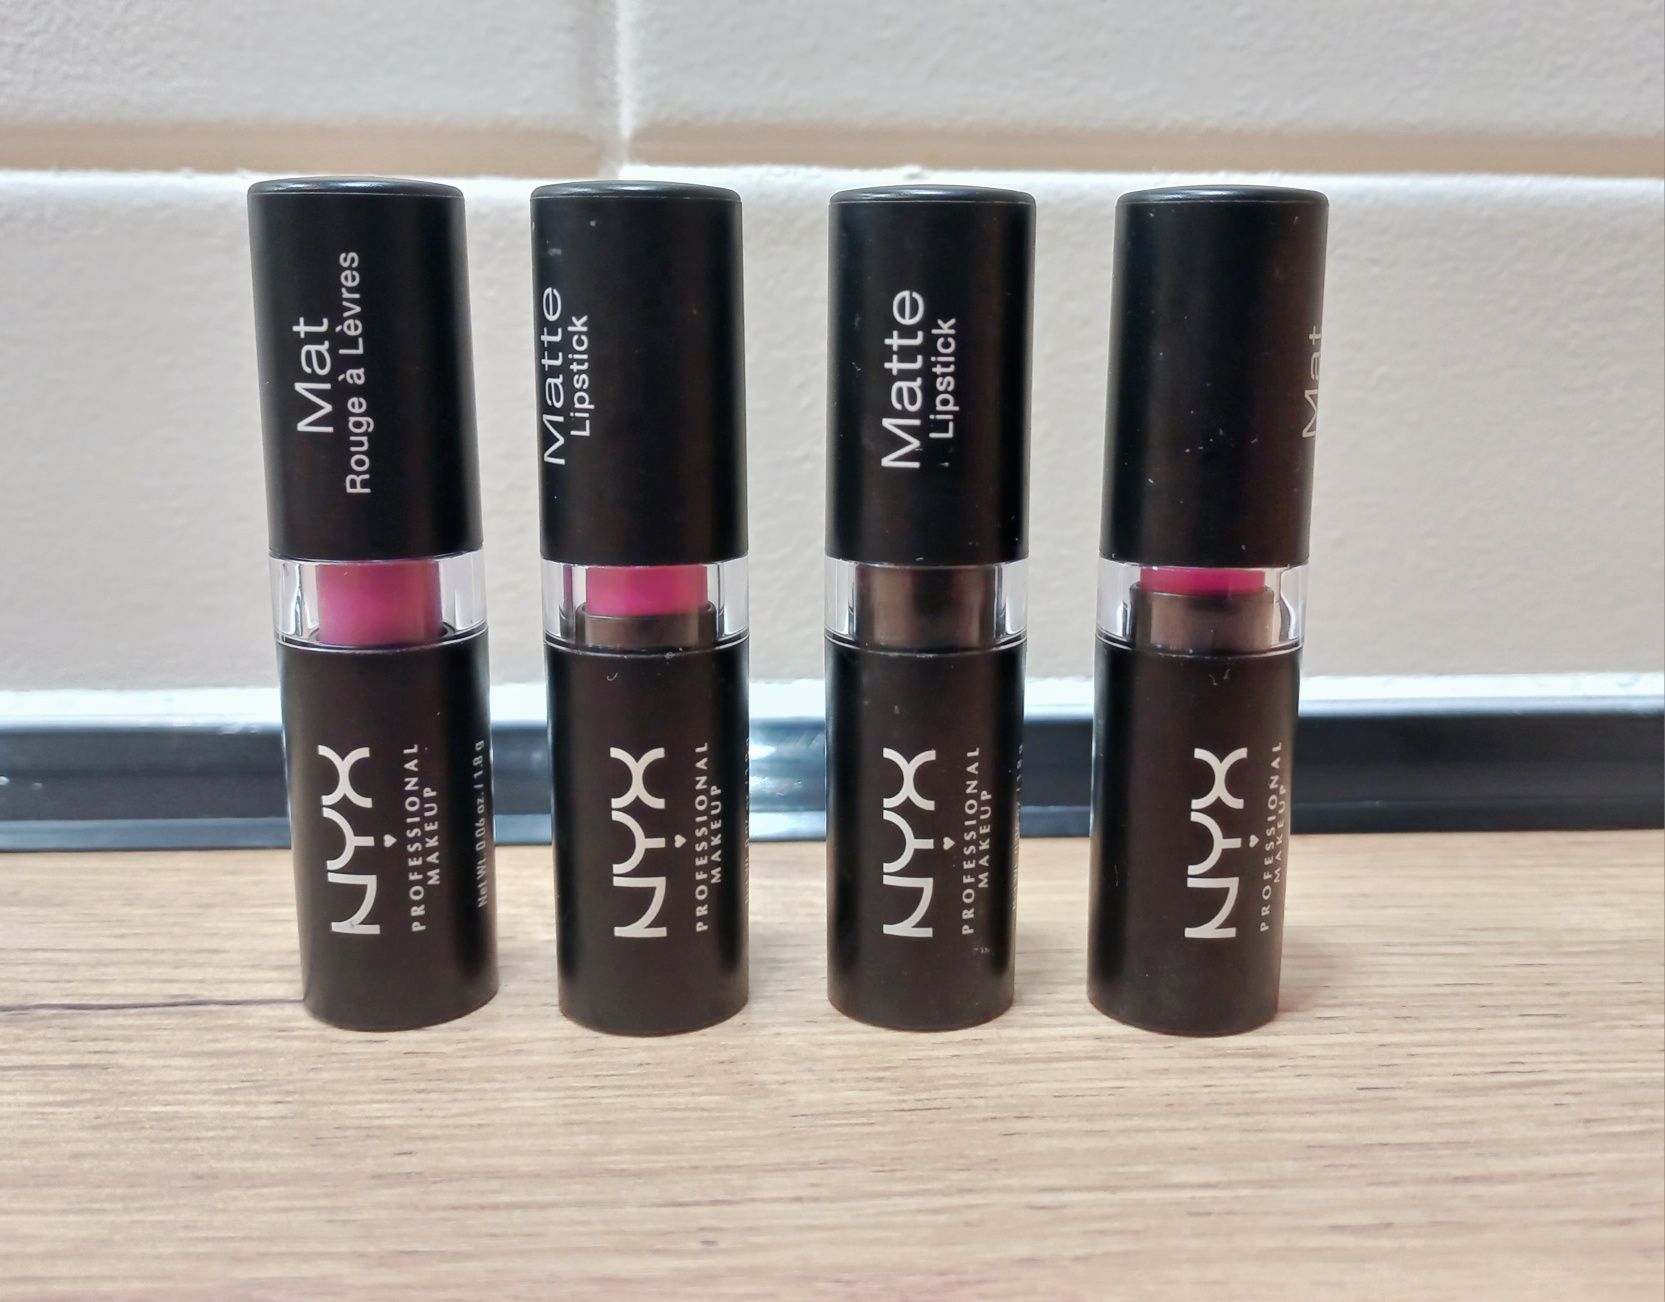 Pomadki NYX perfect red, whipped caviar, siren, natural